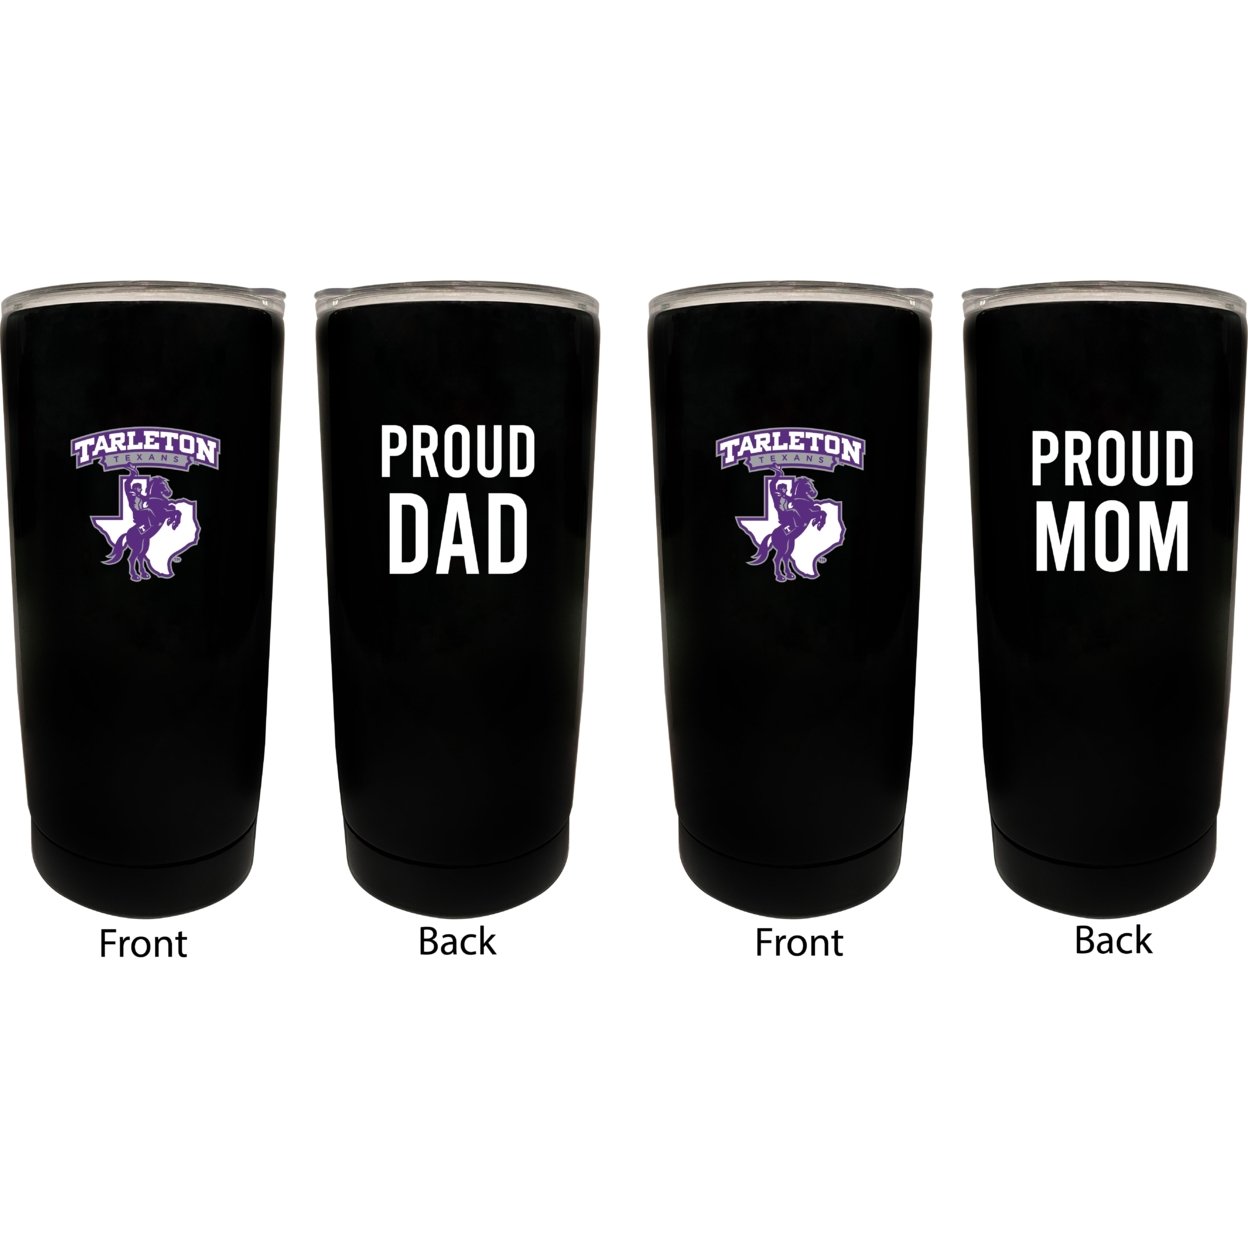 Tarleton State University Proud Mom And Dad 16 Oz Insulated Stainless Steel Tumblers 2 Pack Black.